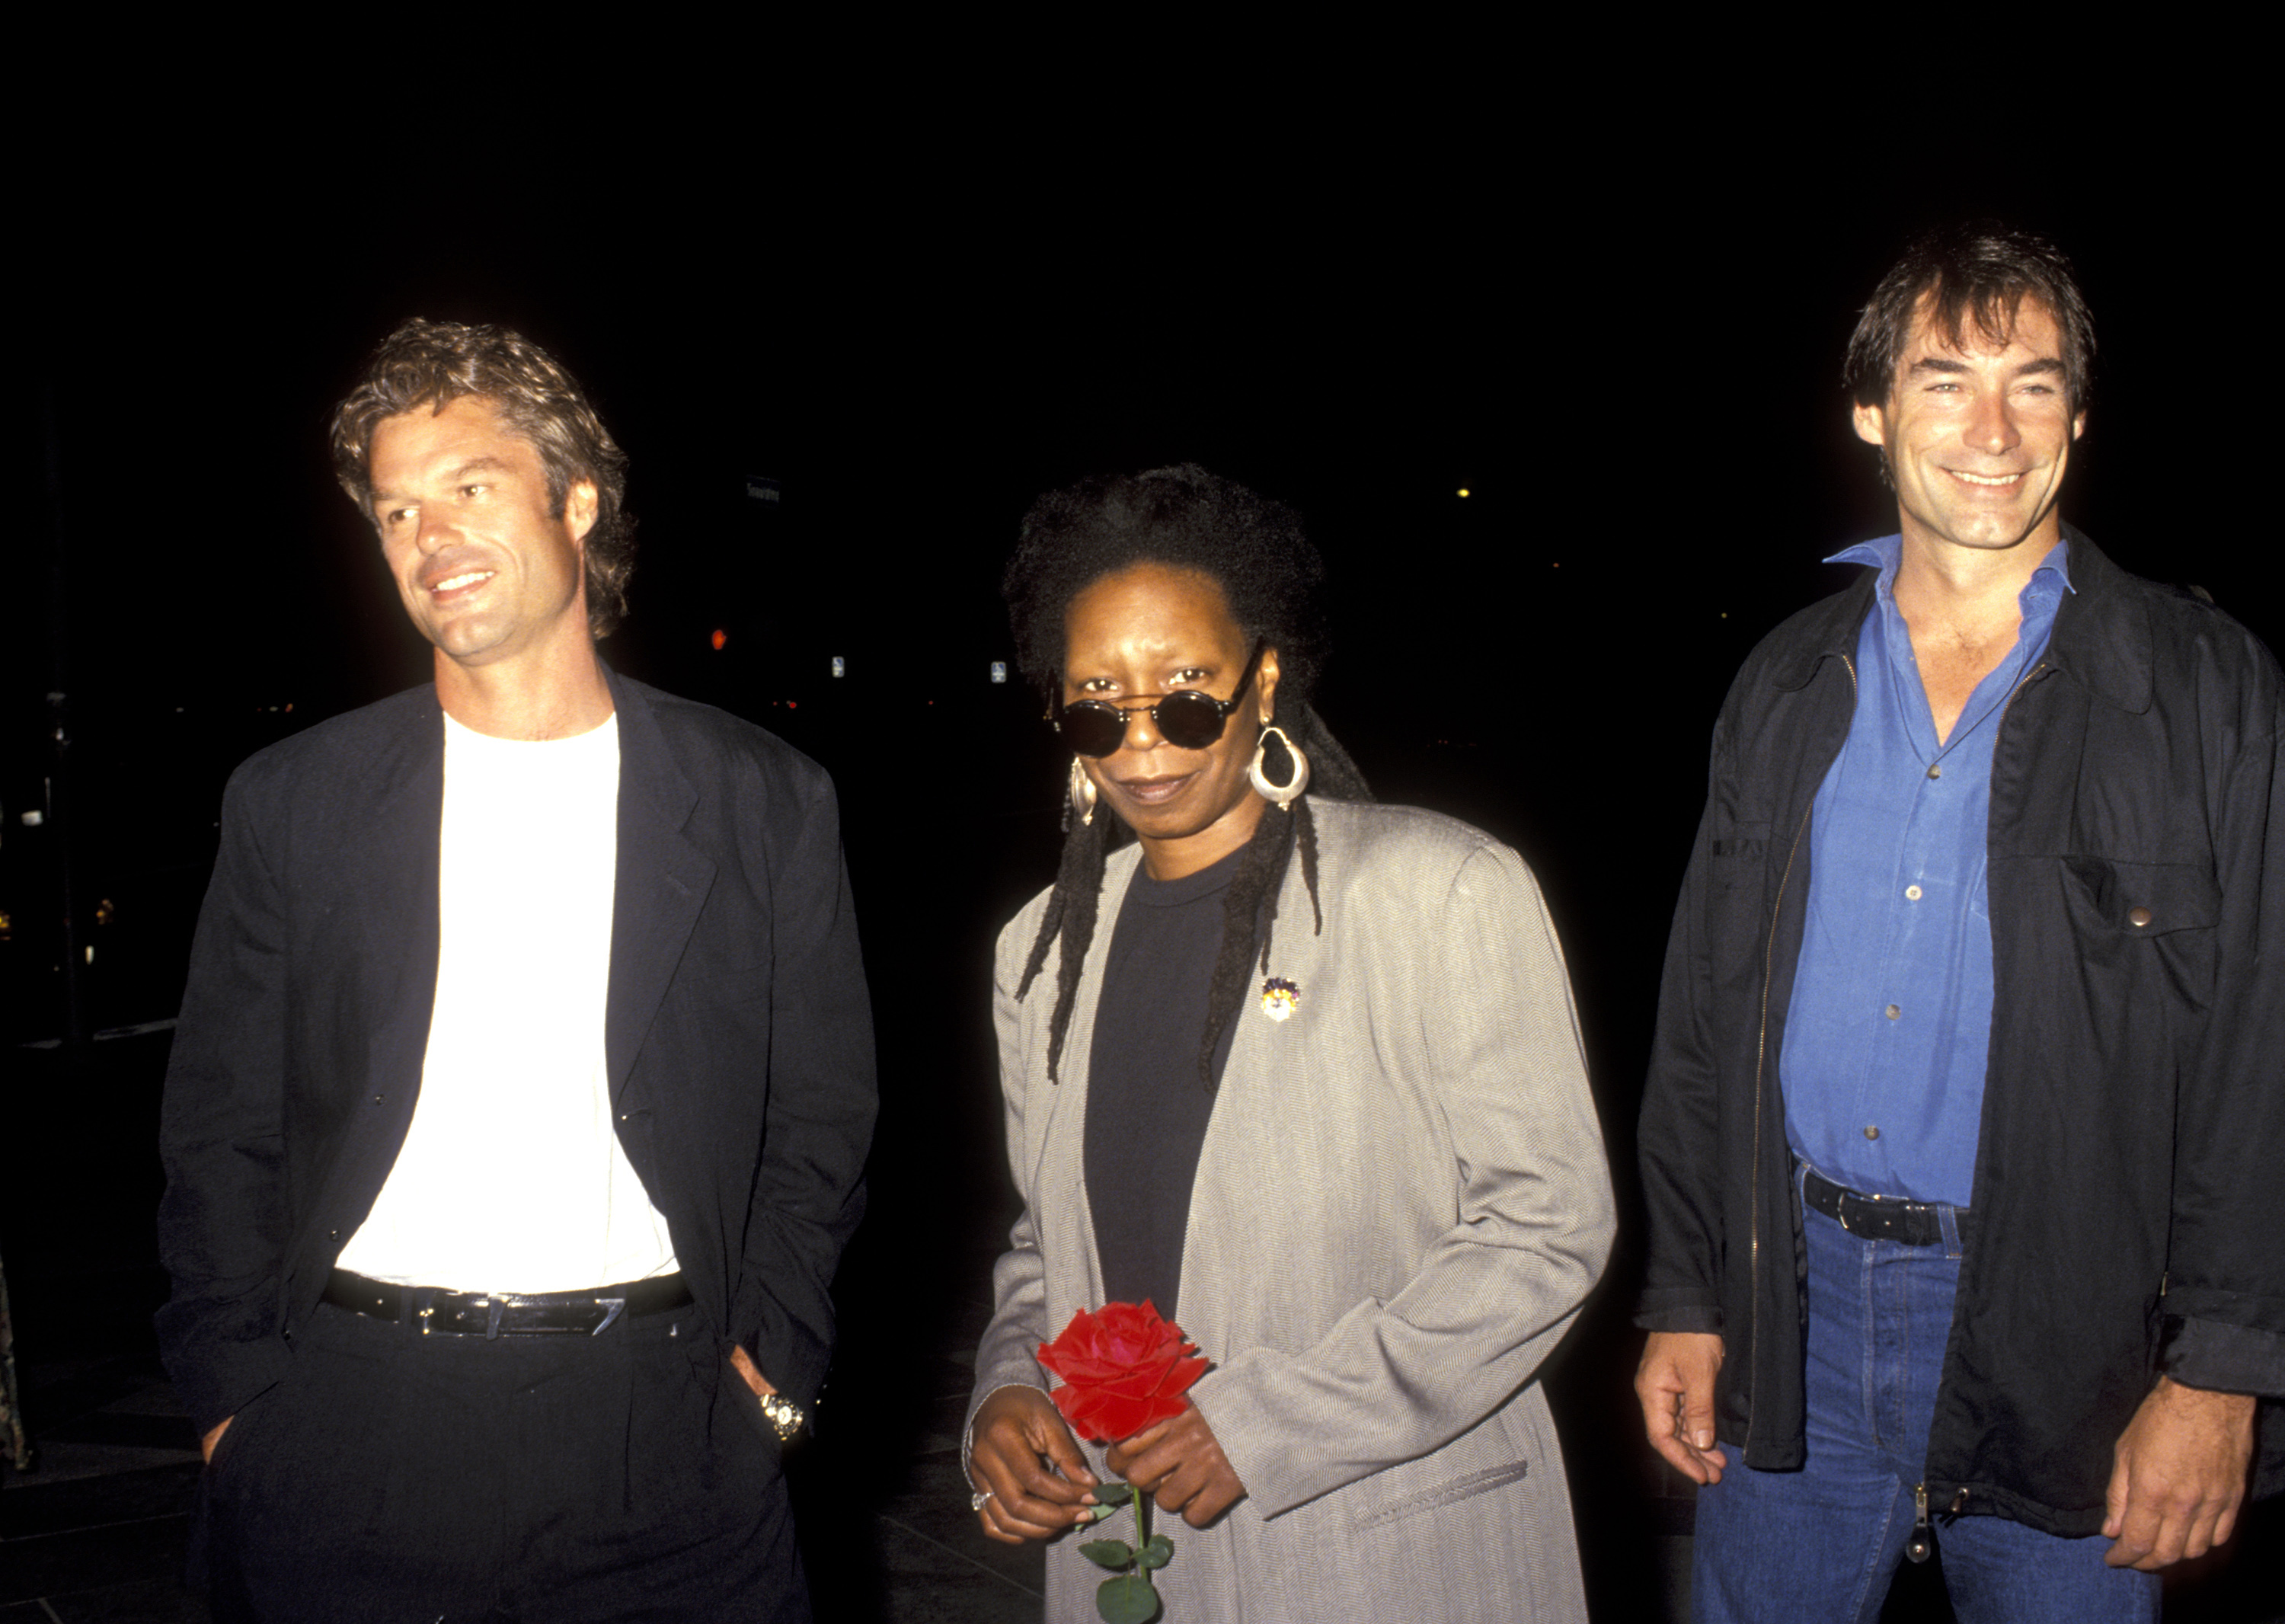 Harry Hamlin, Whoopi Goldberg, and Timothy Dalton at the "Sarafina" premiere in Los Angeles, 1992 | Source: Getty Images